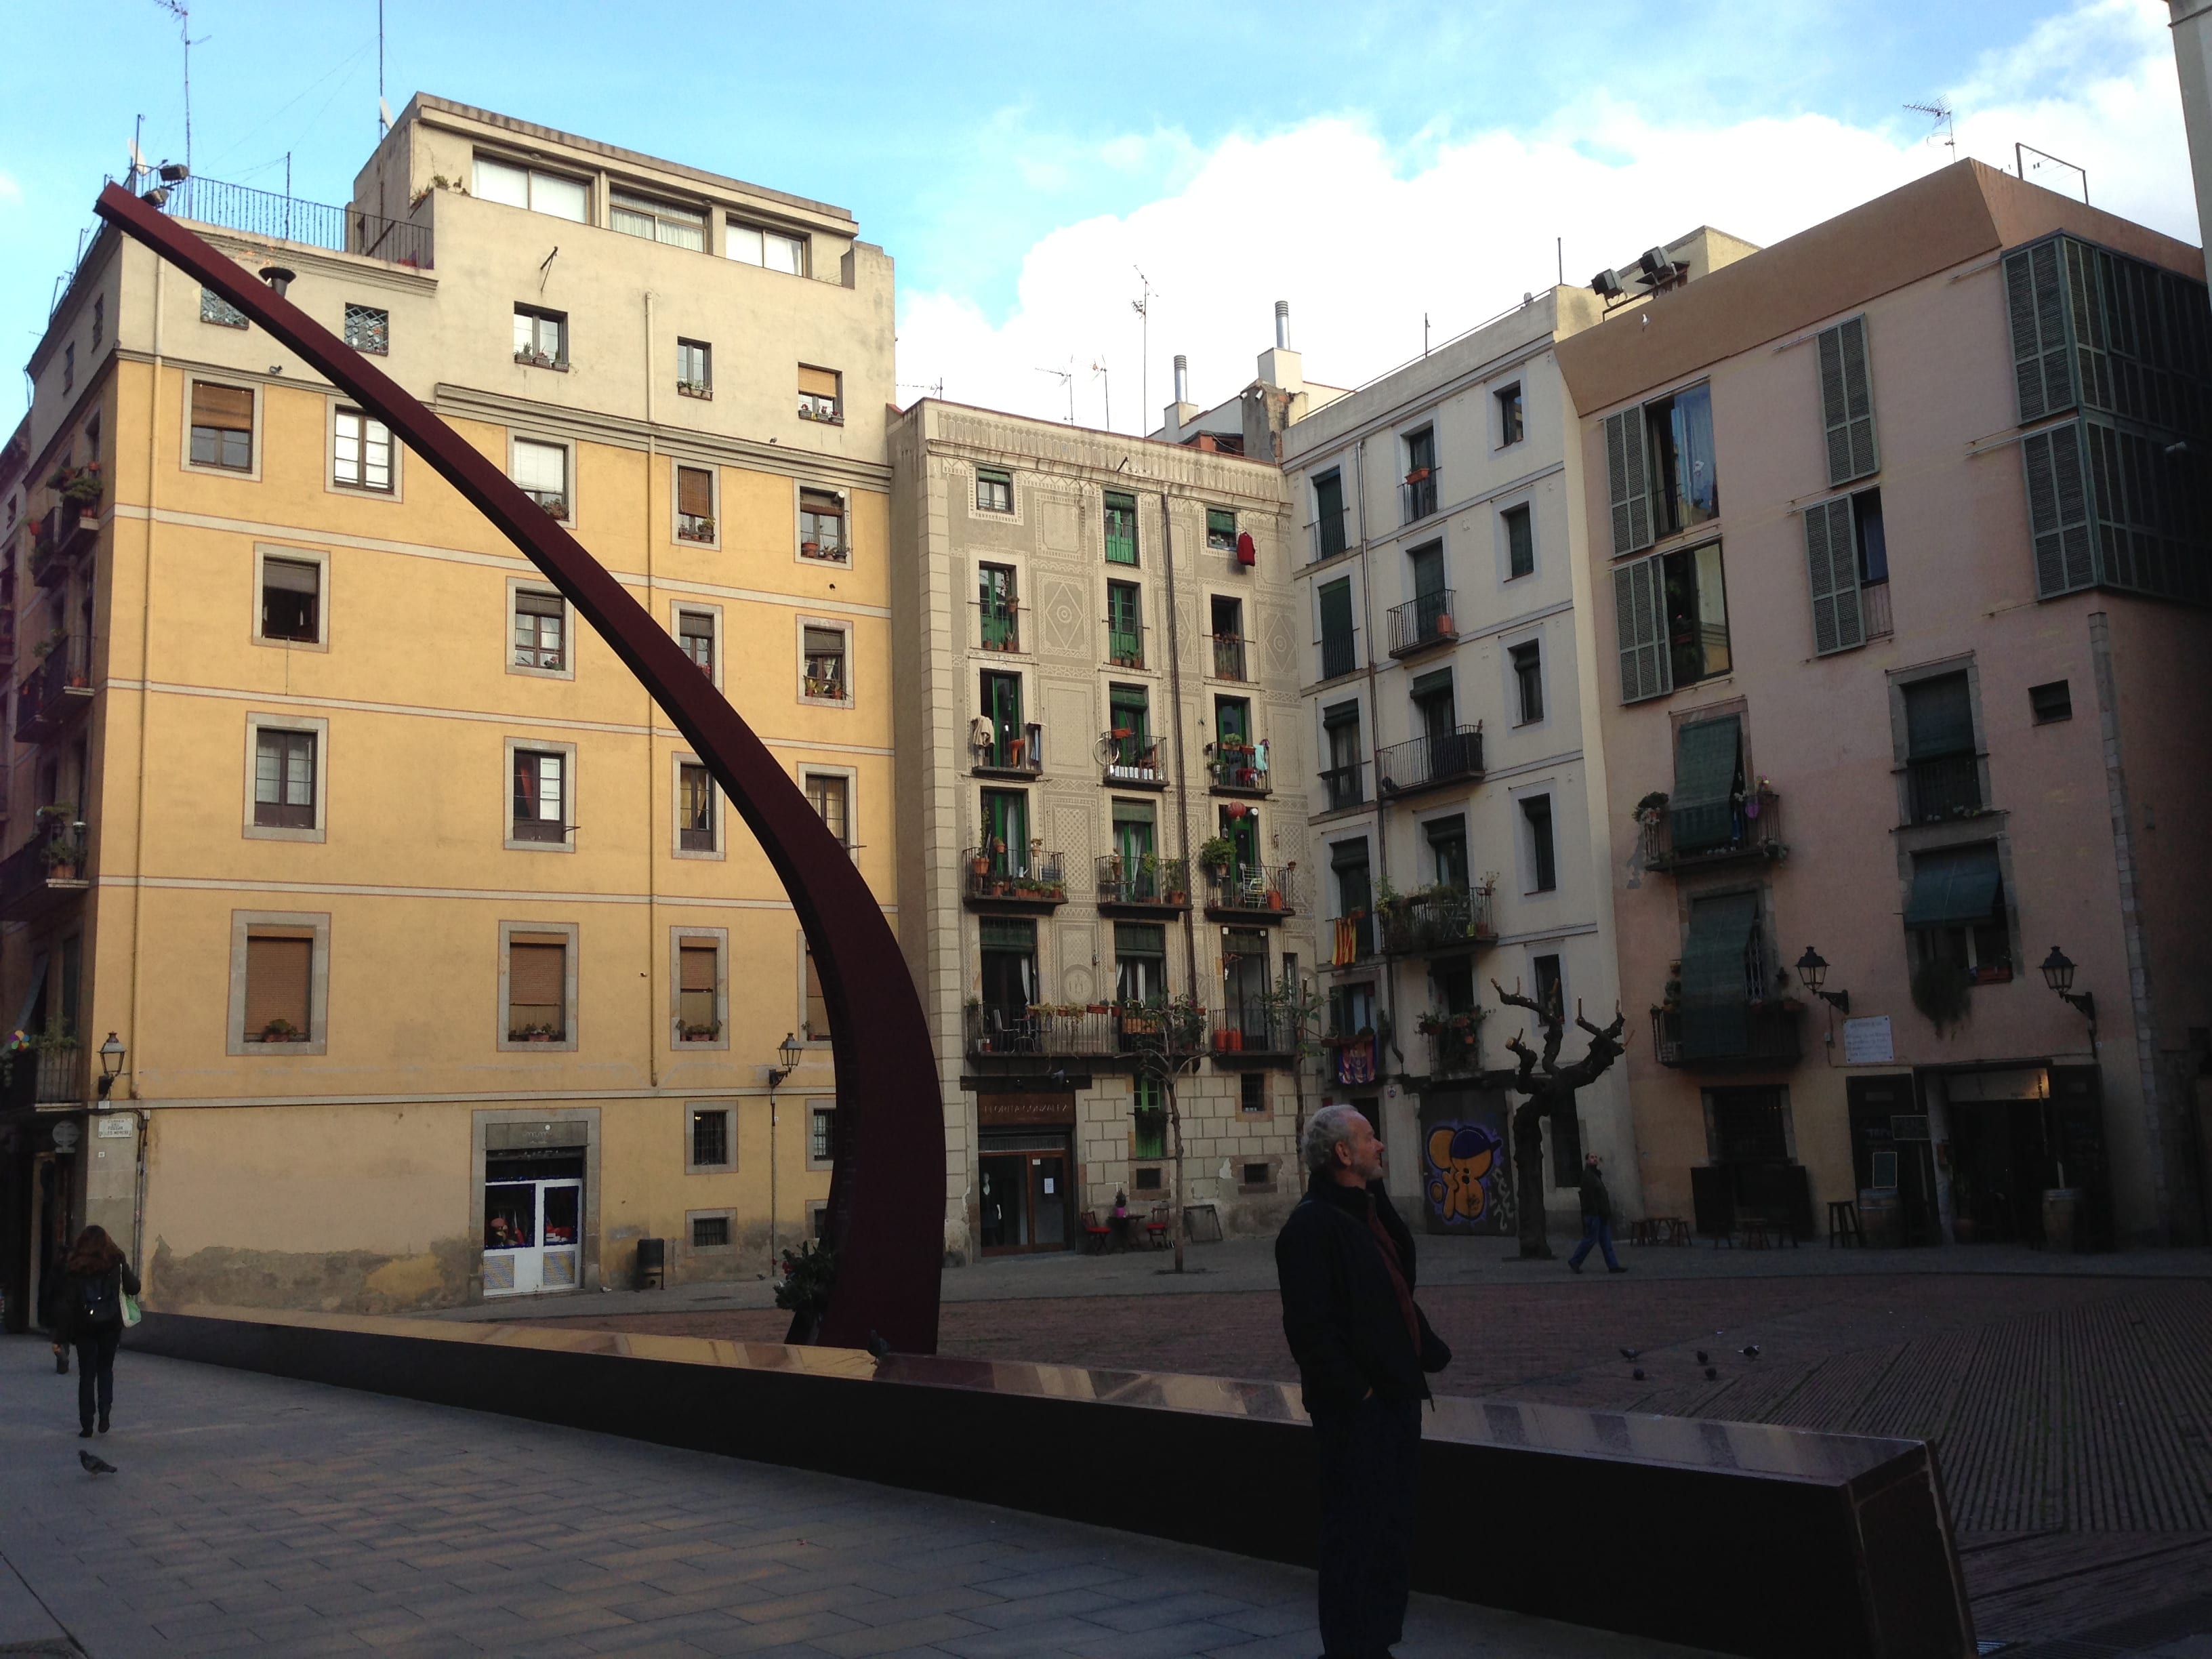 The Fossar de las Moreres, a memorial plaza in Barcelona, commemorates those who died defending the city from Spanish conquest in 1714, and has been the site of major pro-independence protests in recent months.